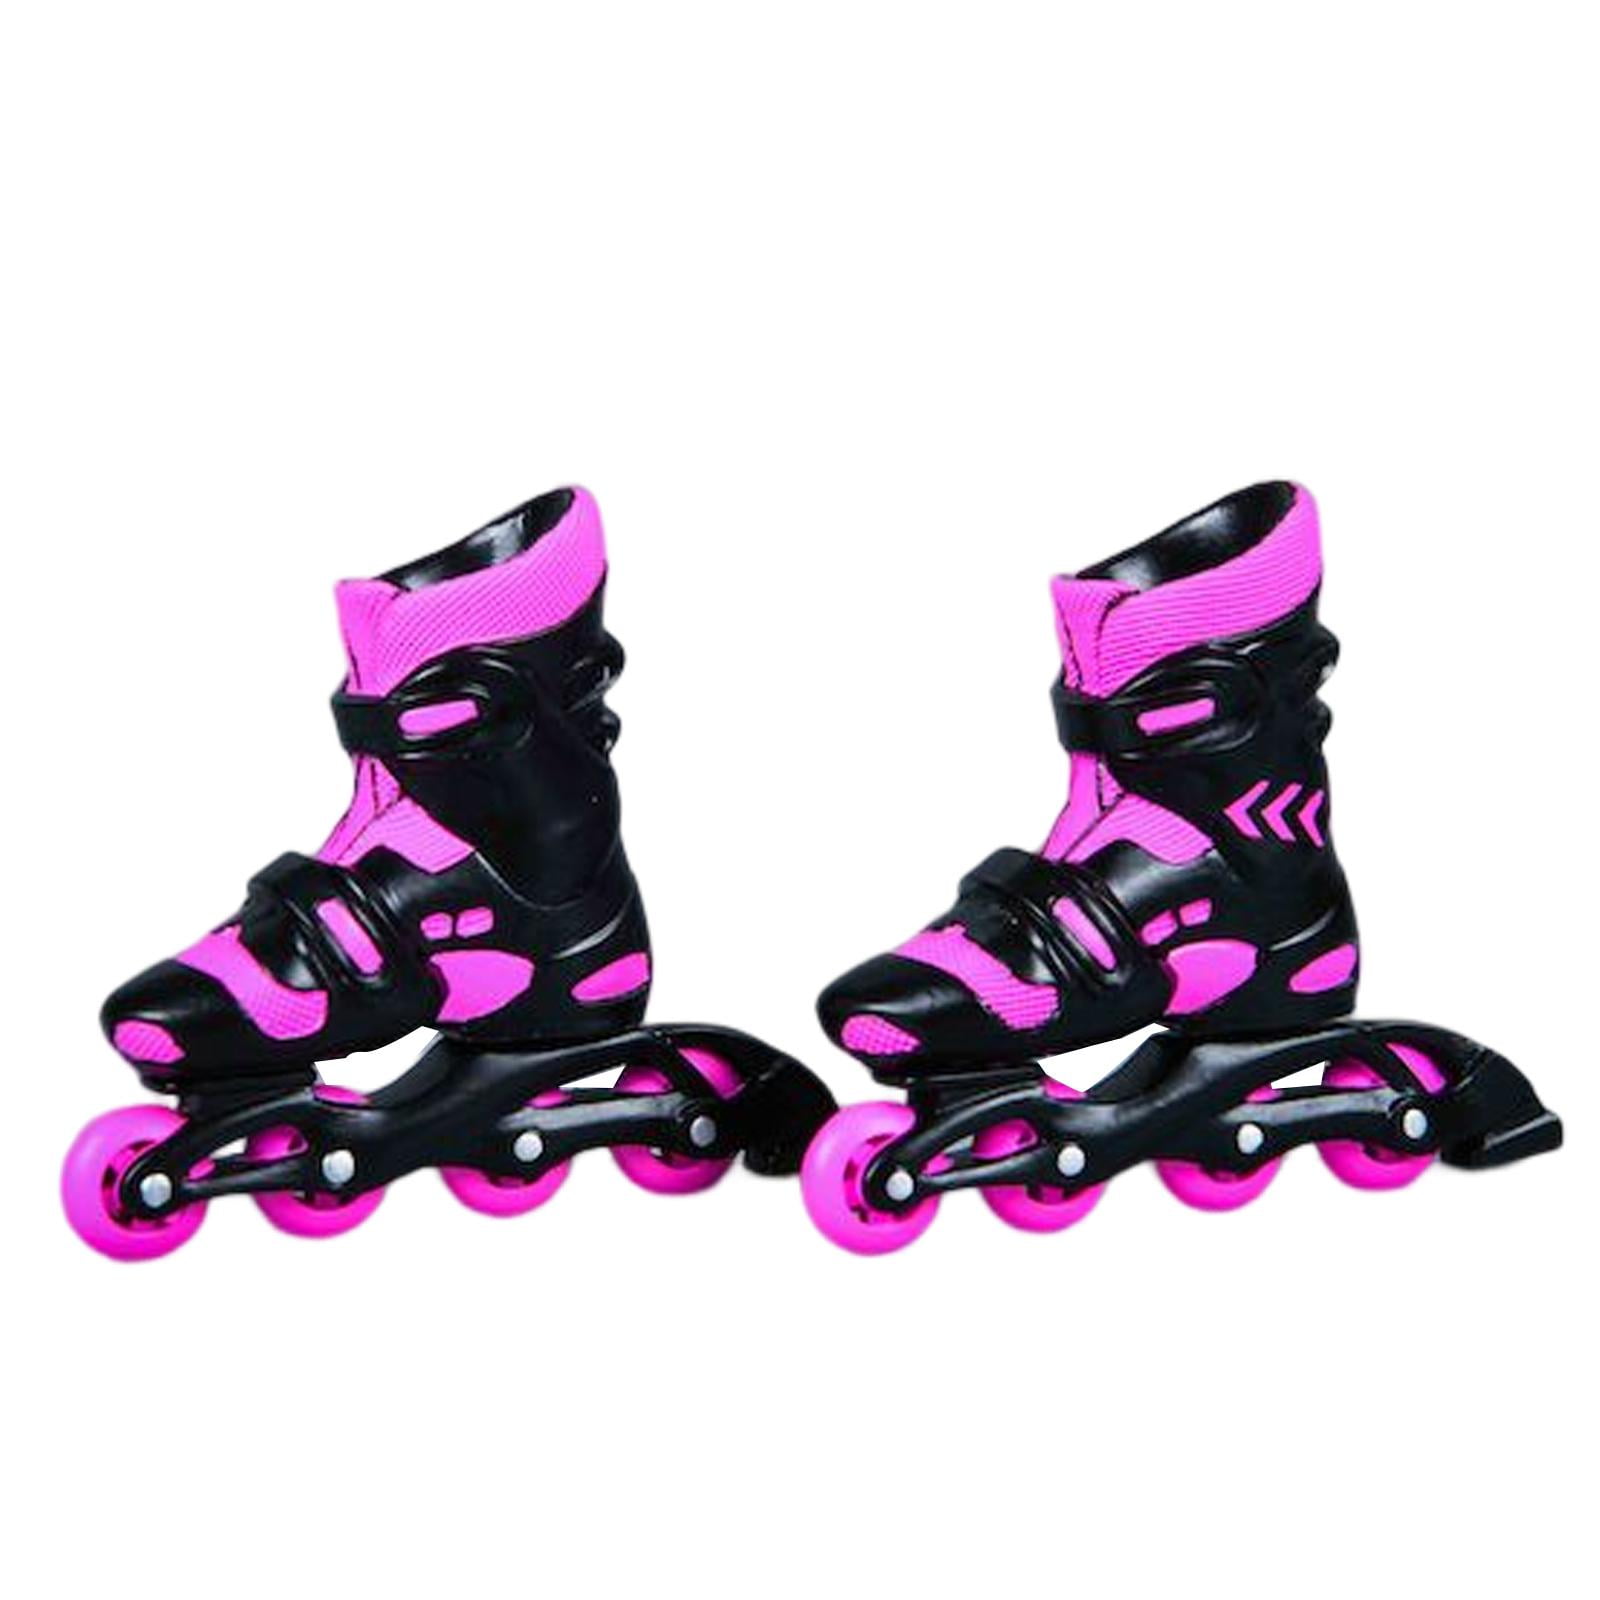 Fashion 1:6 Roller Skates for 12 Female Action Figure Accessories | Walmart Canada